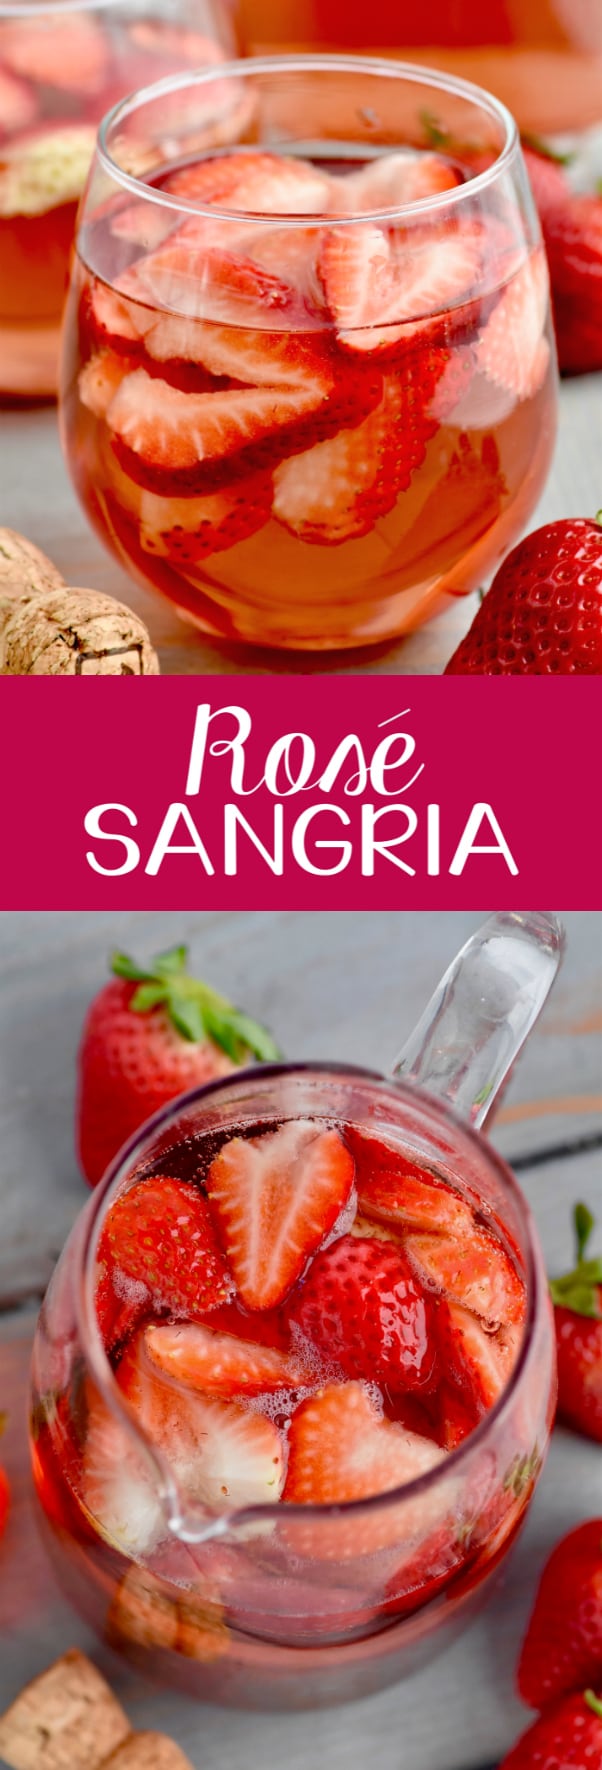 This Rose Sangria recipe with vodka is the perfect easy drink for a party or get together. This cocktail comes together so fast!